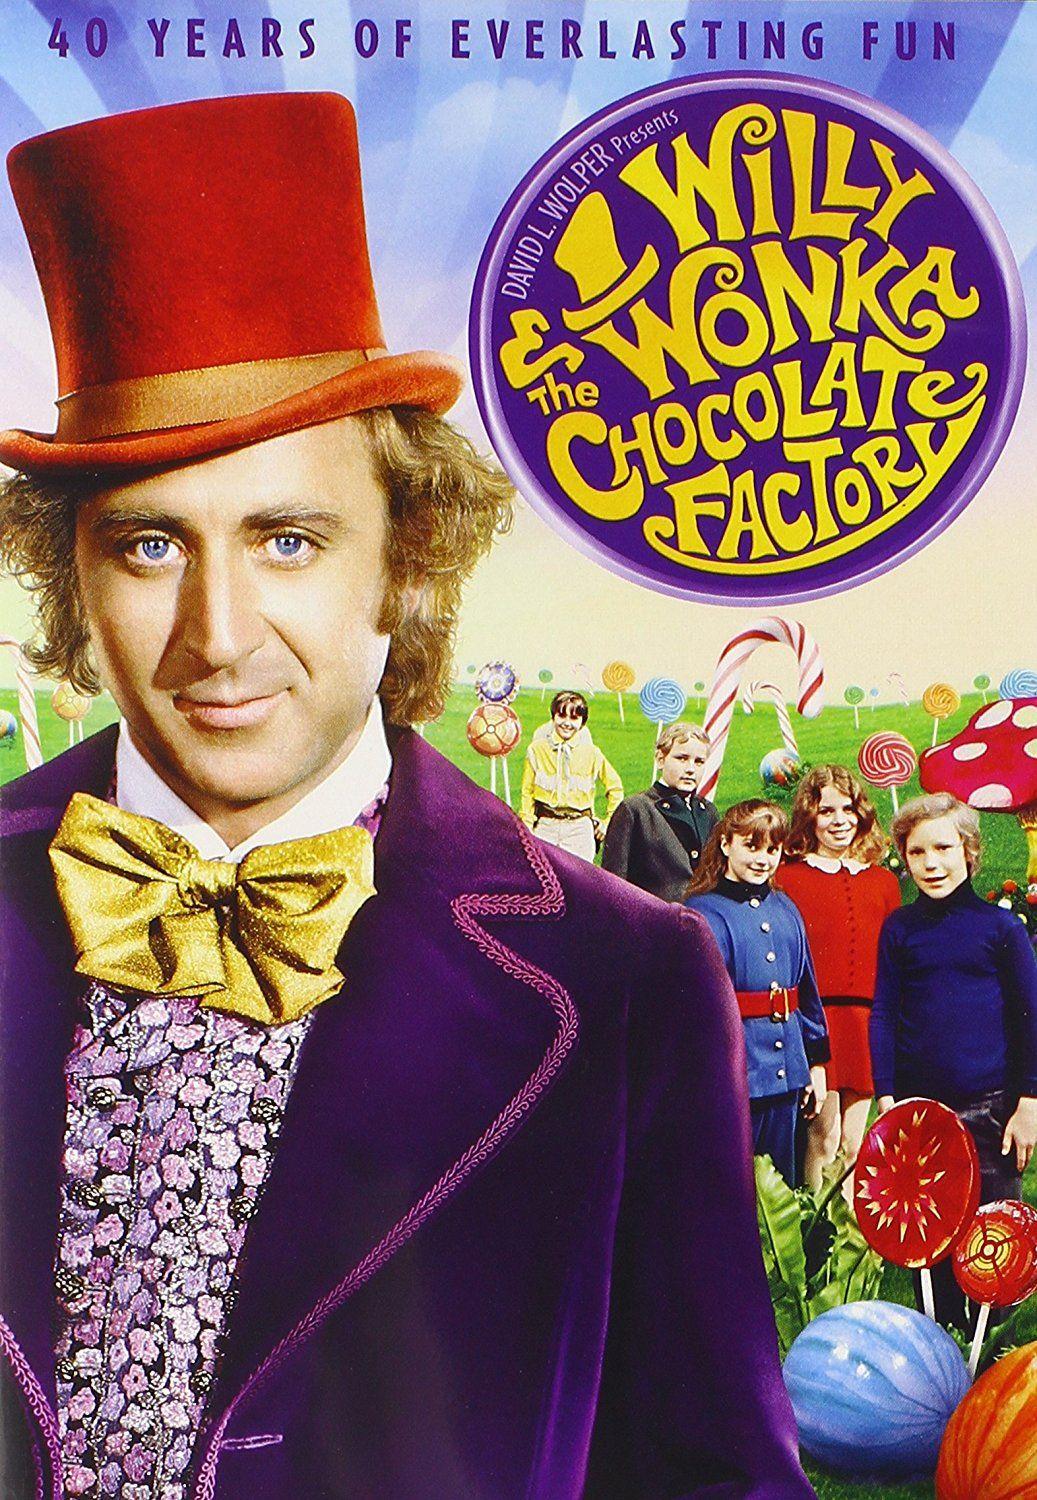 Willy Wonka & The Chocolate Factory wallpaper, Movie, HQ Willy